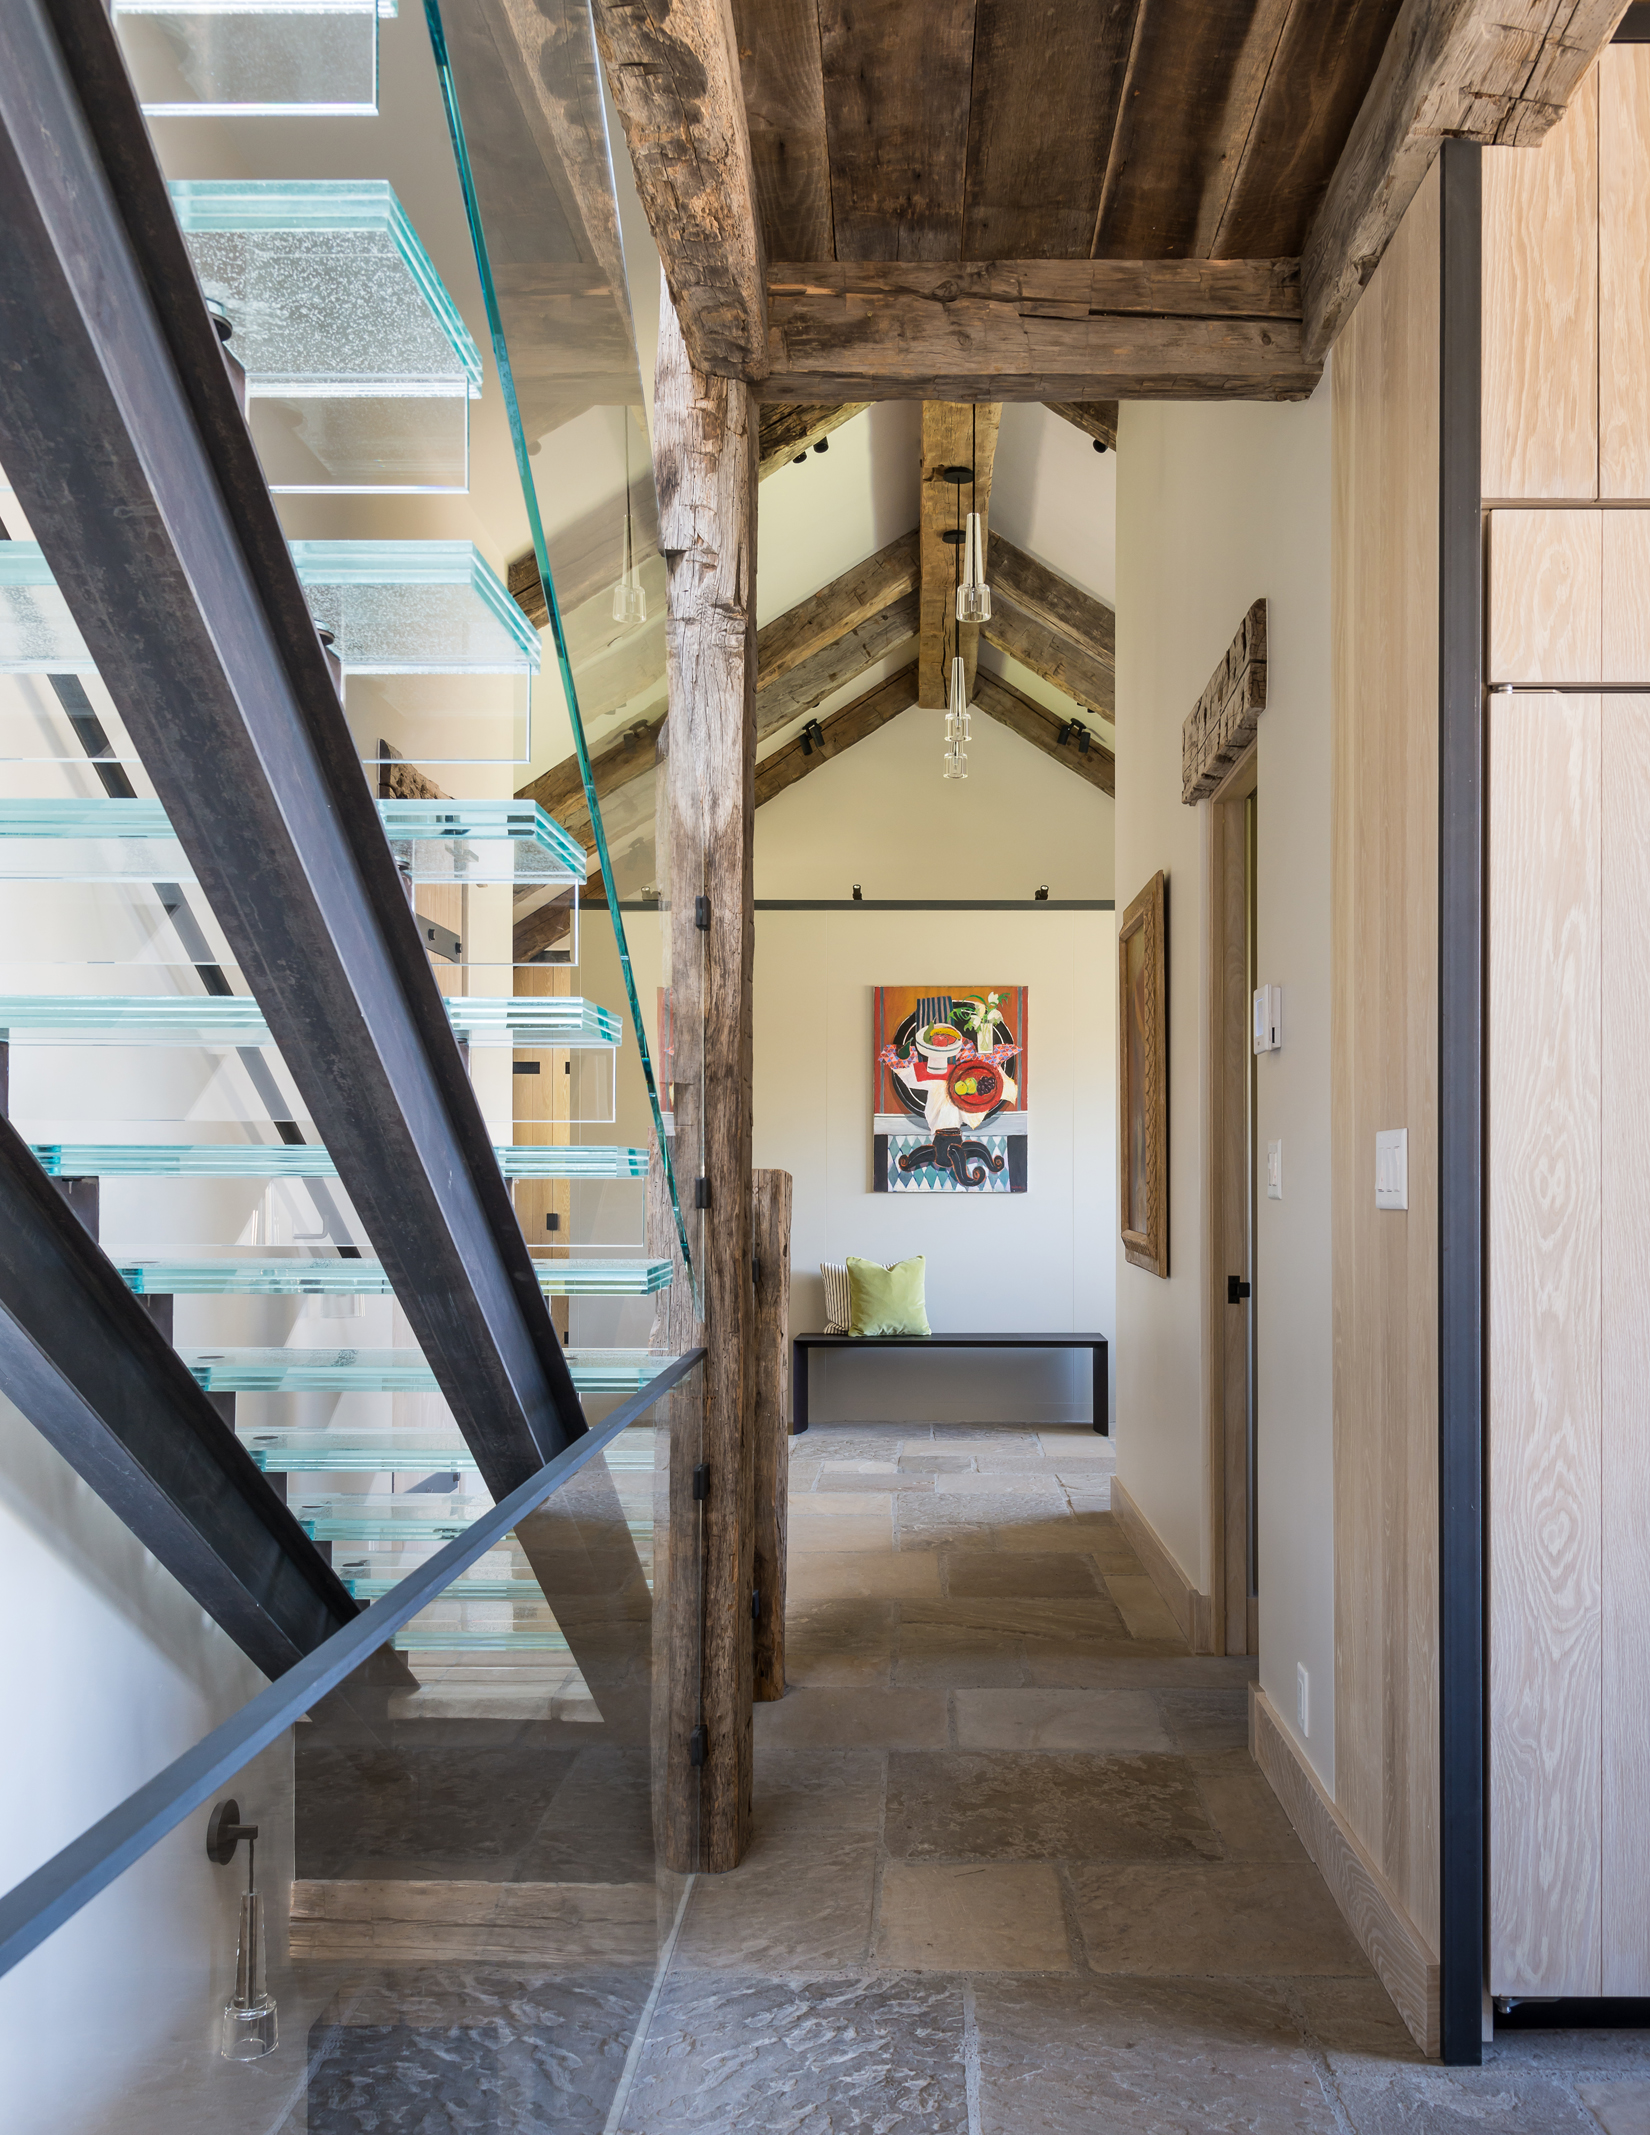 Showing JLF’s mastery of Mountain Modern style, combining historical and contemporary elements, a glass staircase feels at home with rustic timbers in this JLF-designed house (PC: Audrey Hall).